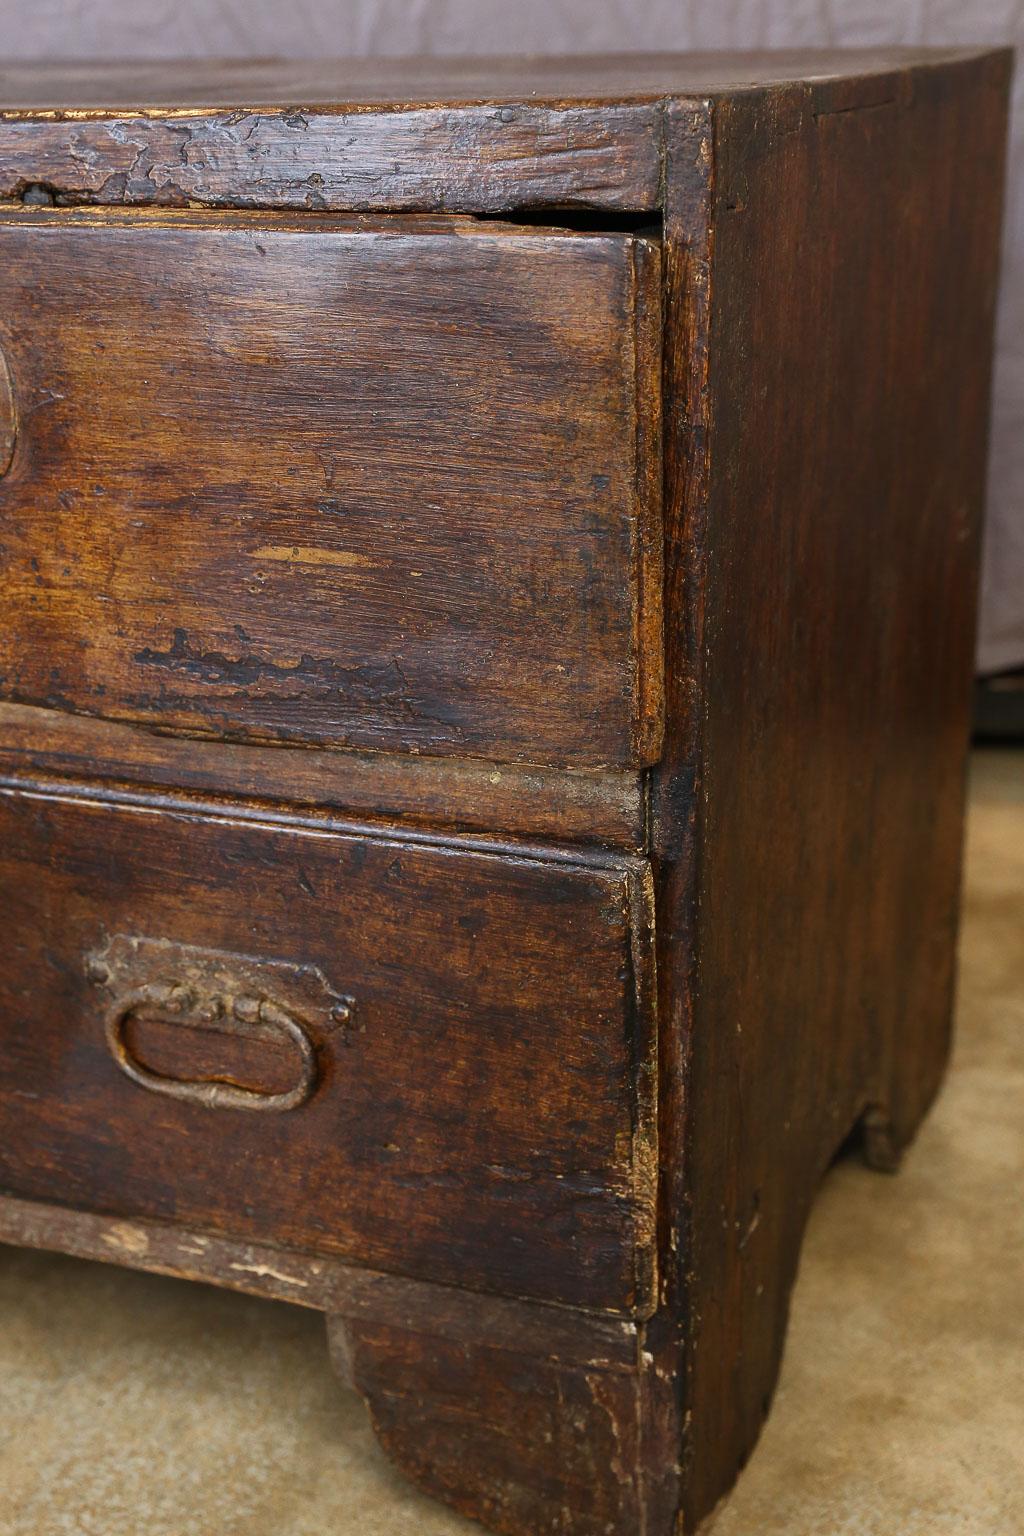 This is a handmade French three-drawer chest, circa 1820. The piece features two drawers over one large drawer with hand forged iron pulls and two keys. The chest is strong and solid with a lovely hand waxed patina.